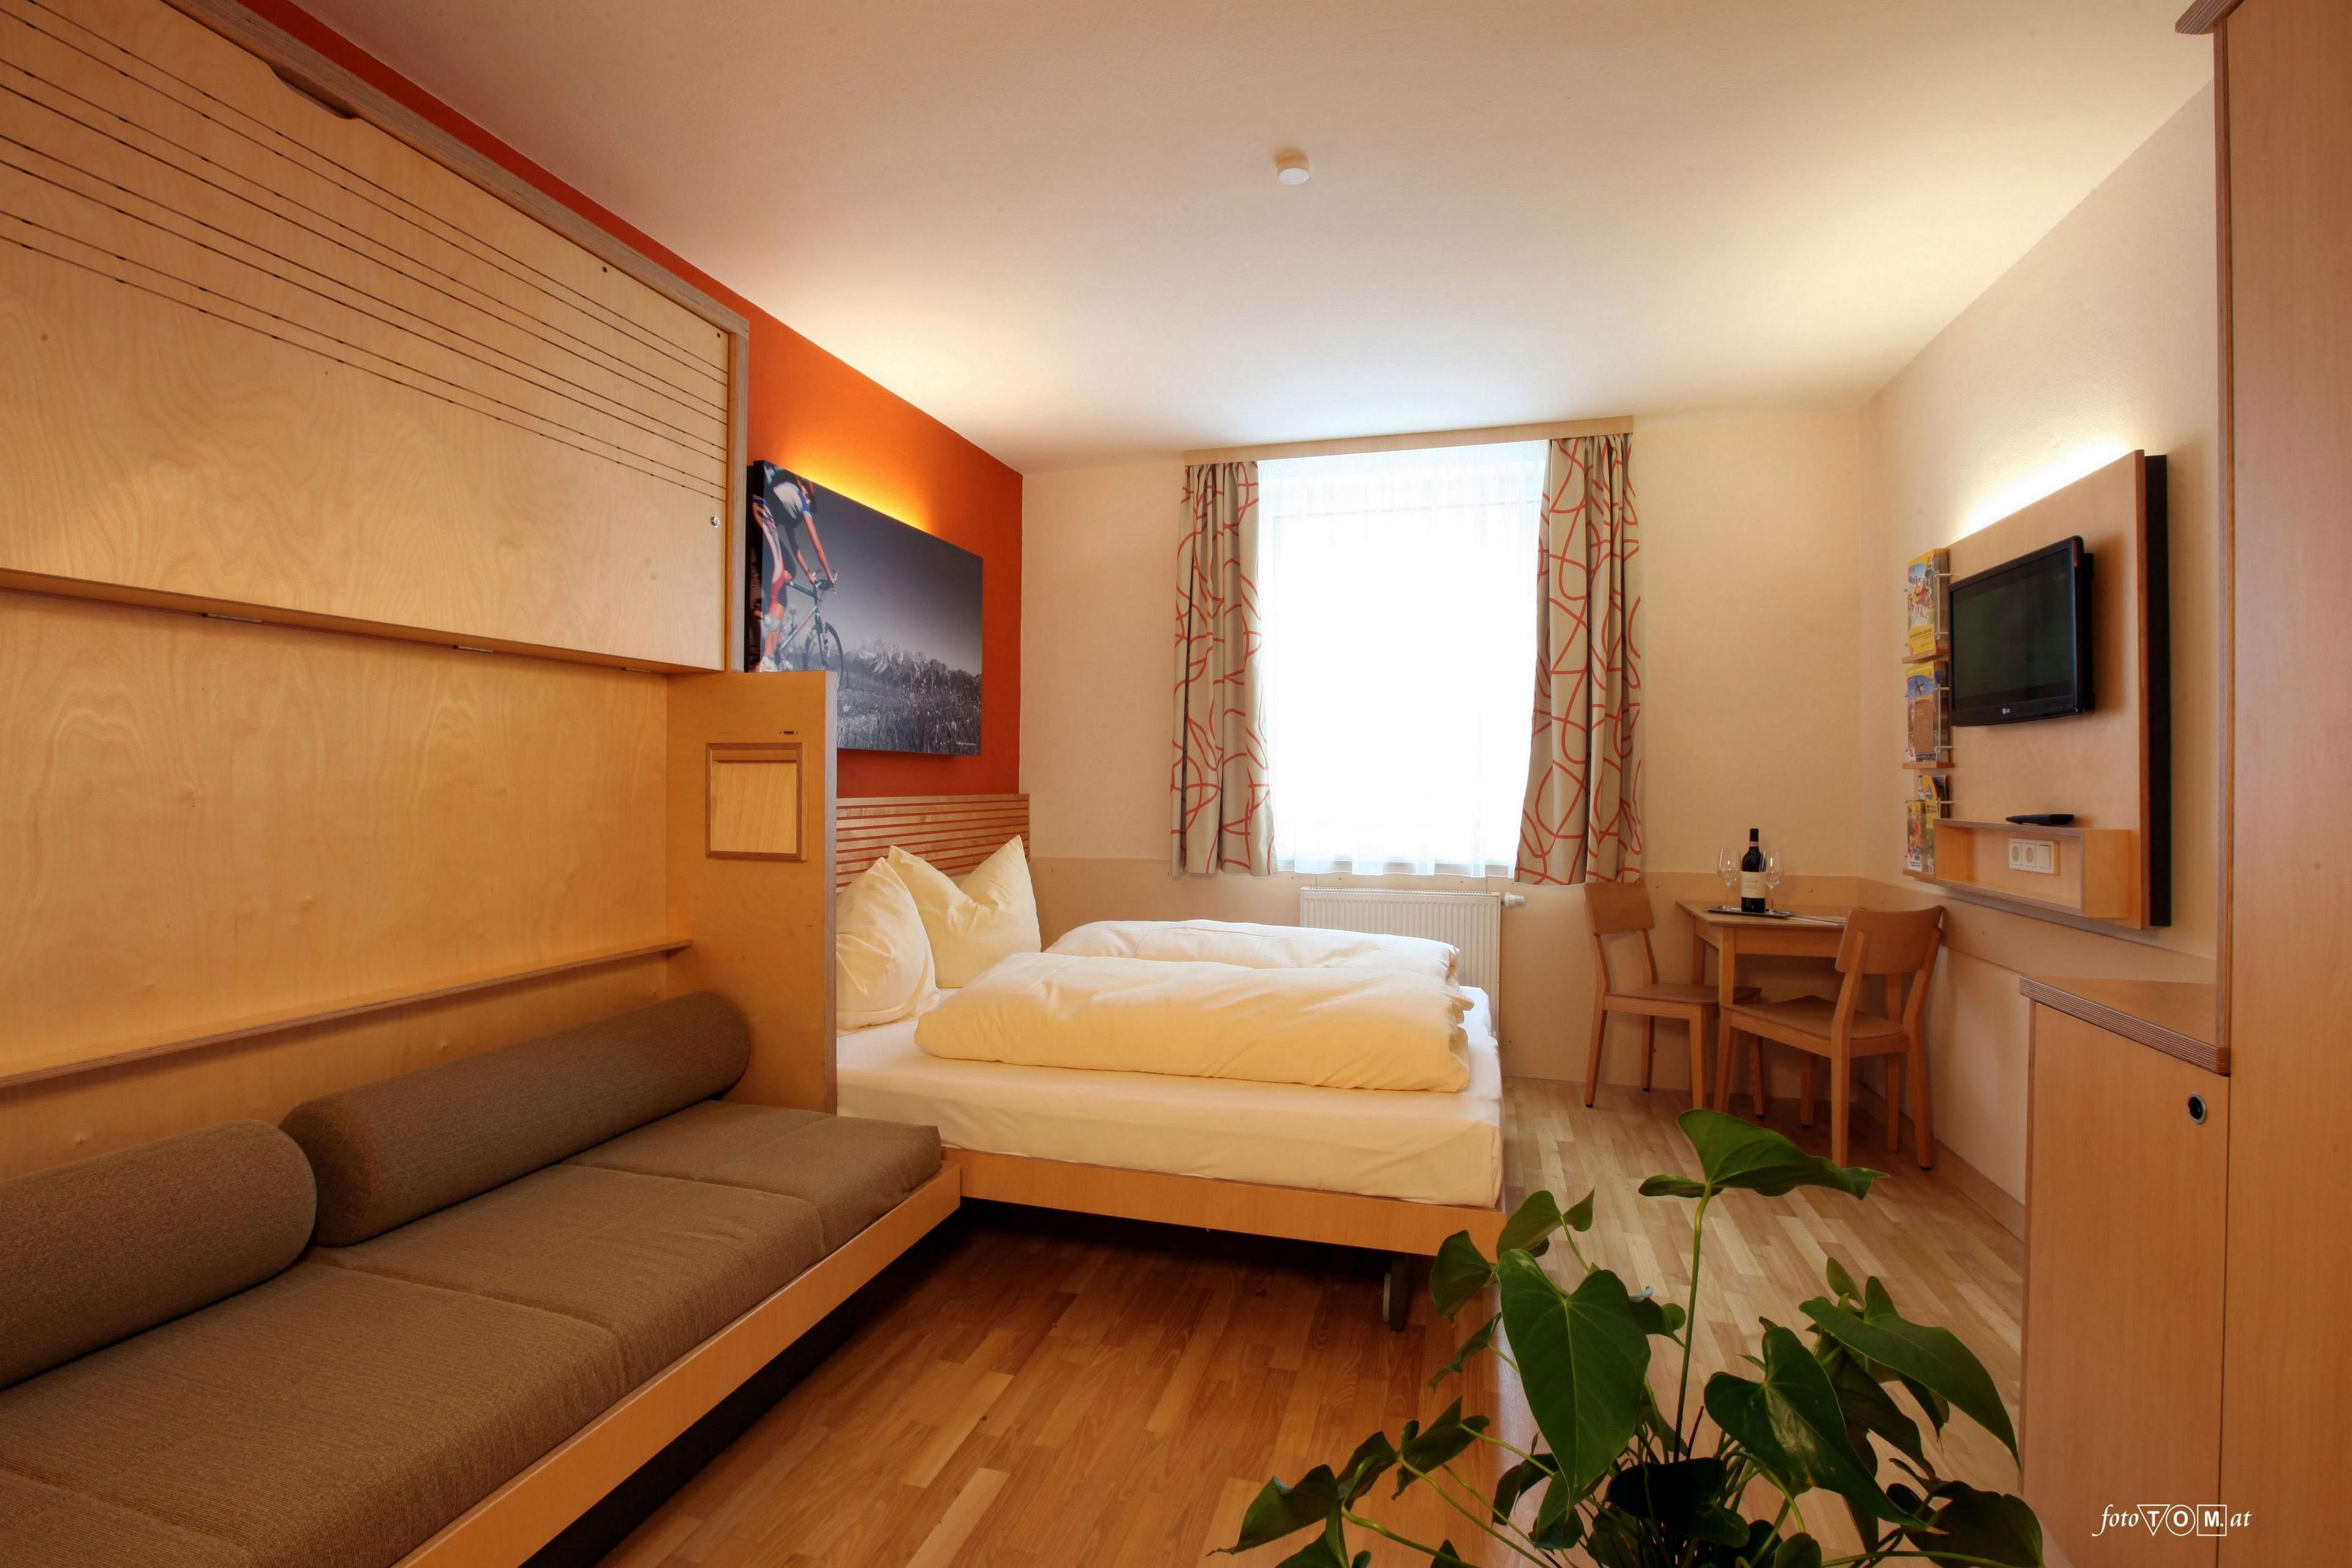 Our single rooms are furnished with TV, bathroom with shower, hairdryer, toilet and heating.